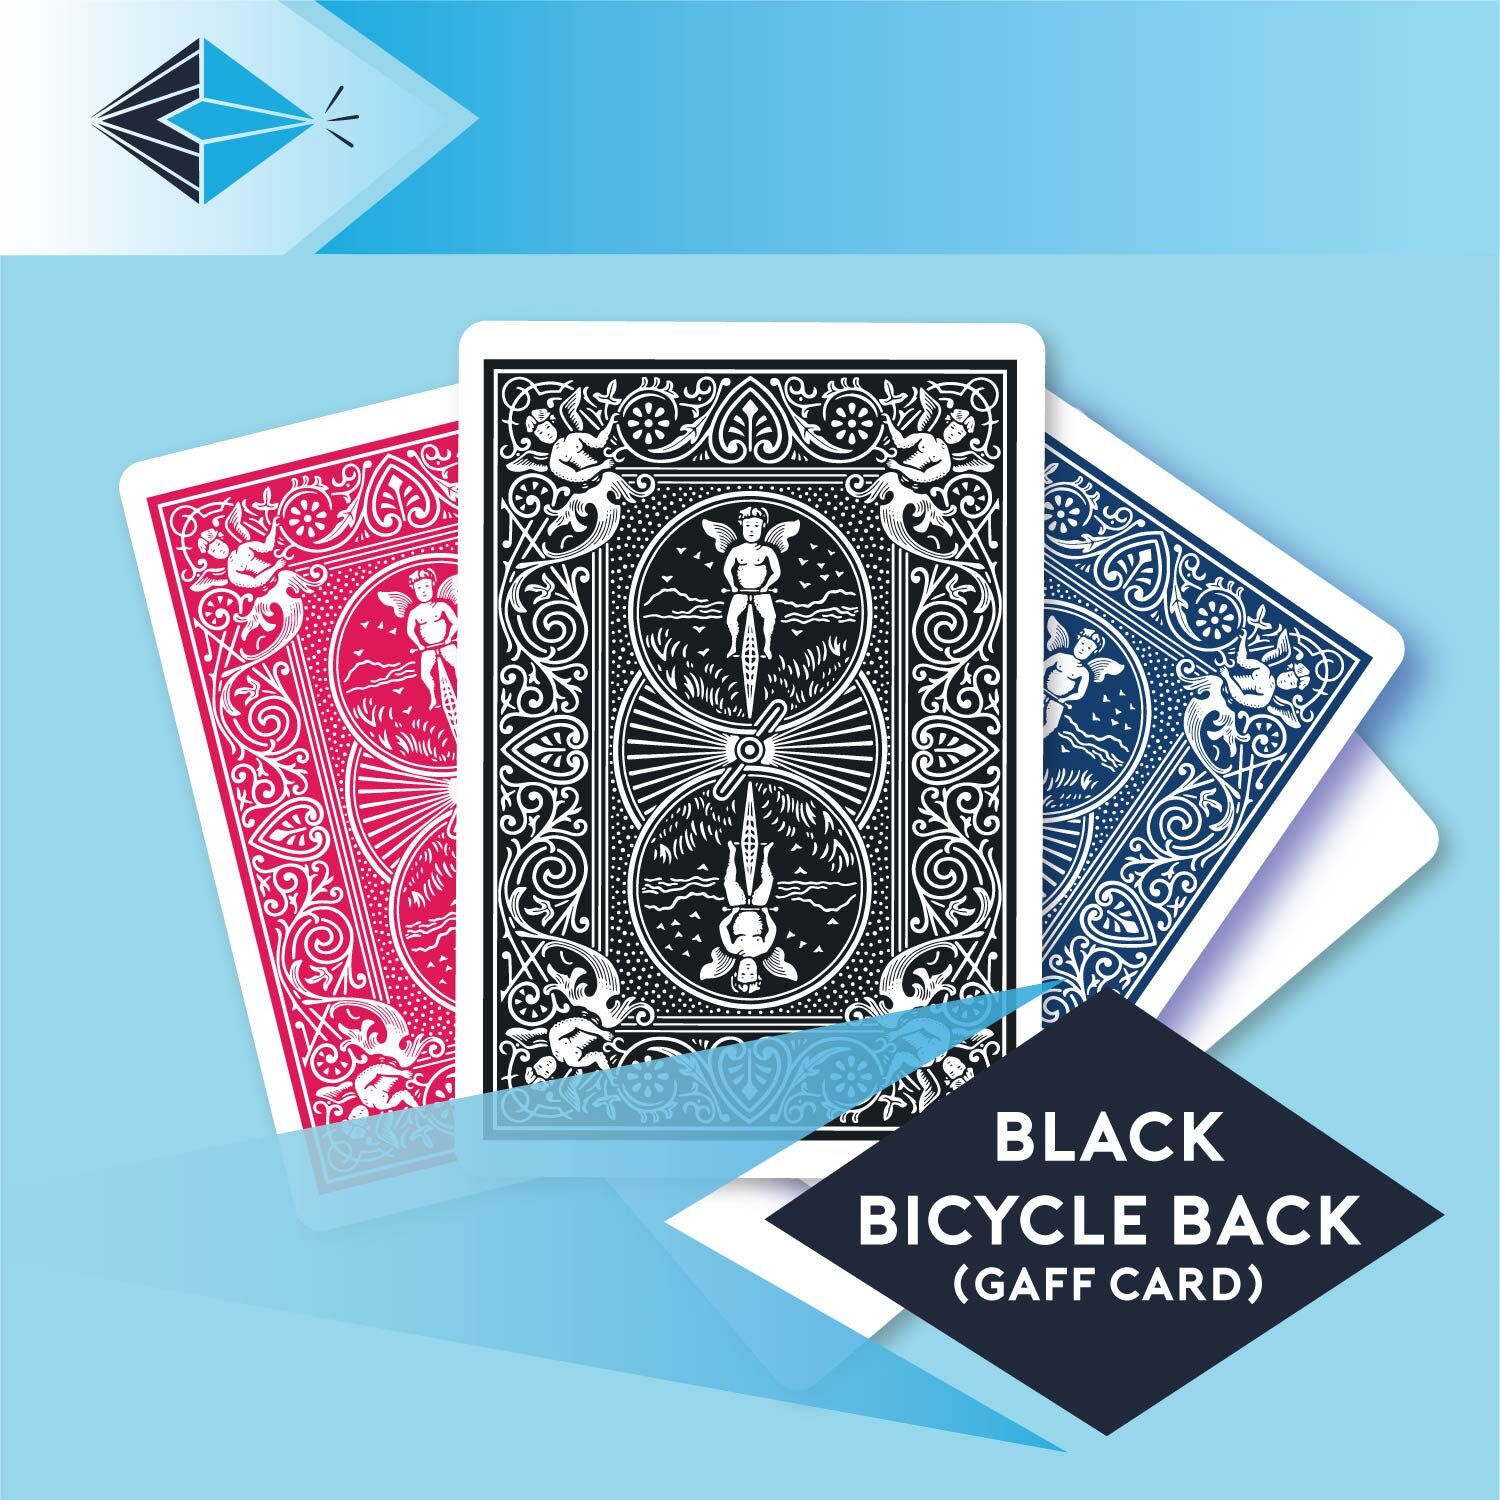 Black Bicycle Back gaff card 27 playing card for magicians printing printers Stockport Manchester UK